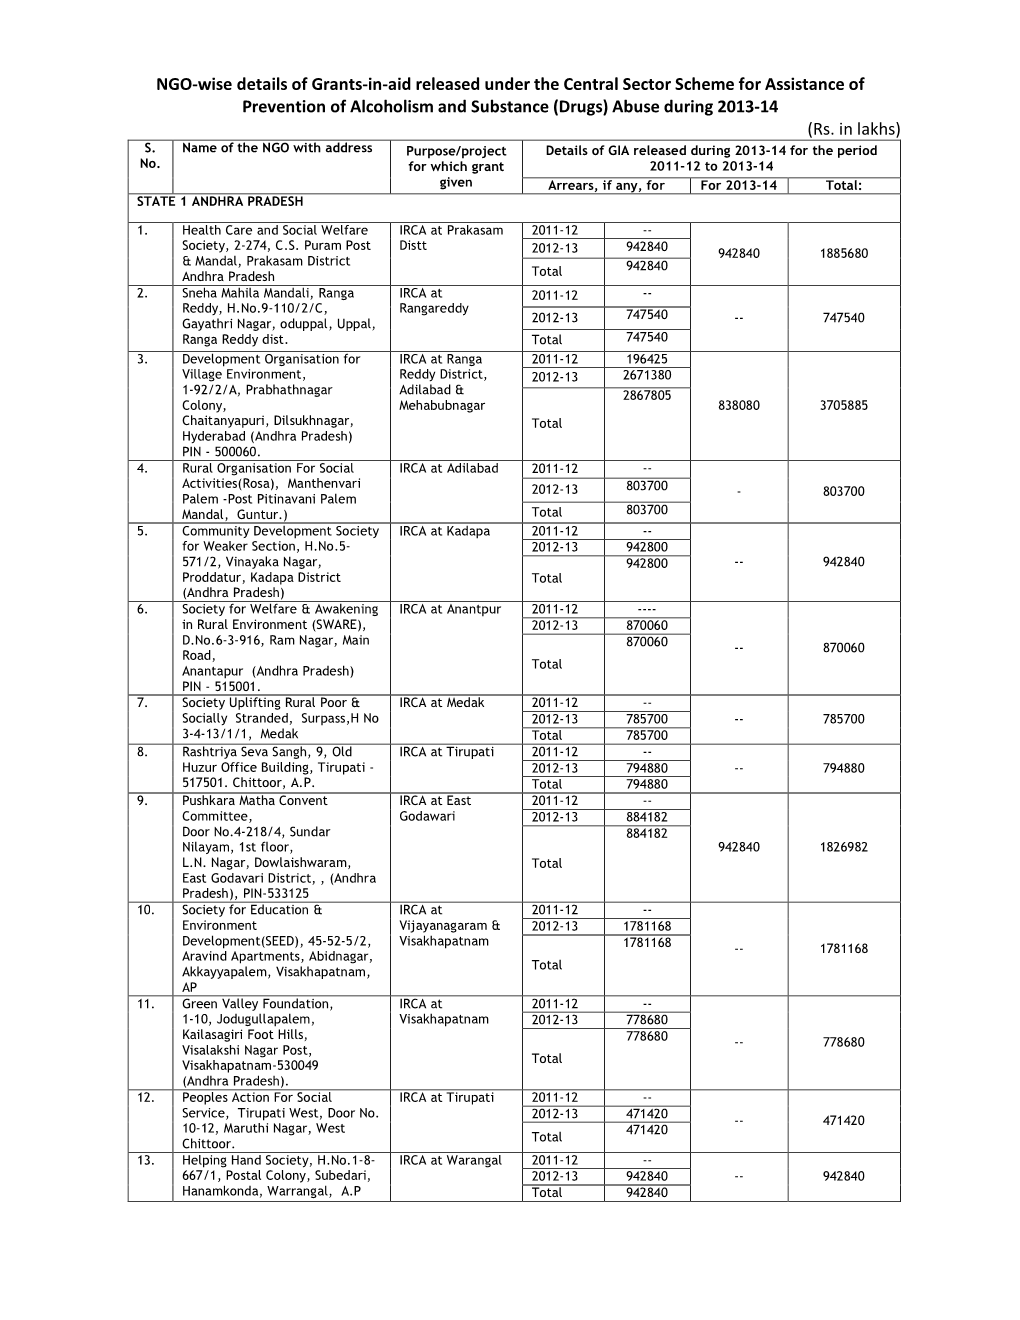 NGO-Wise Details of Grants-In-Aid Released Under the Central Sector Scheme for Assistance of Prevention of Alcoholism and Substance (Drugs) Abuse During 2013-14 (Rs